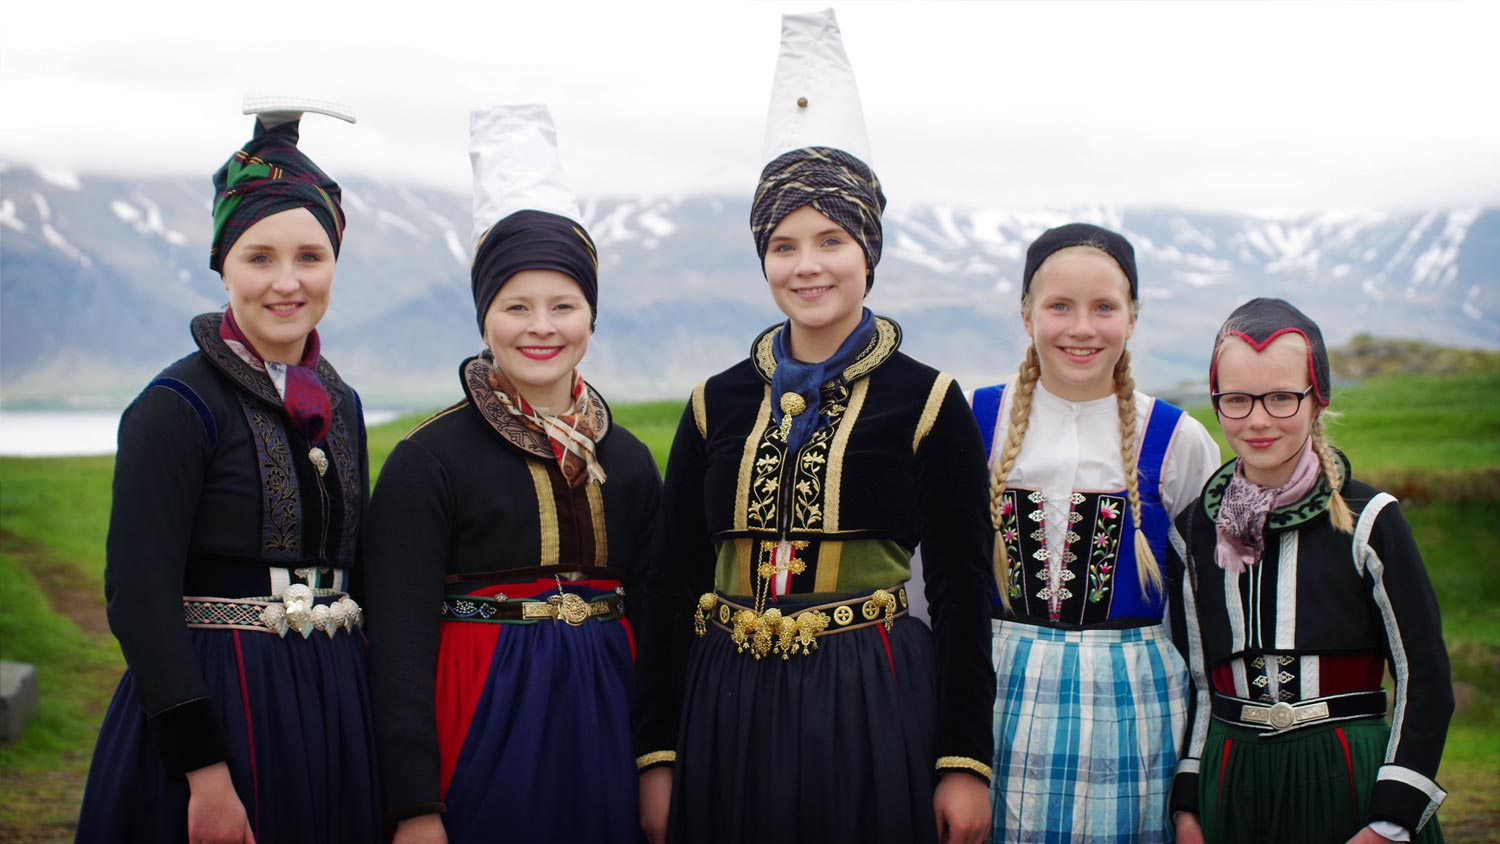 A group of three young women and two girls, all dressed in multicolored costumes of the older style. In the background a green slope and a mountain range.